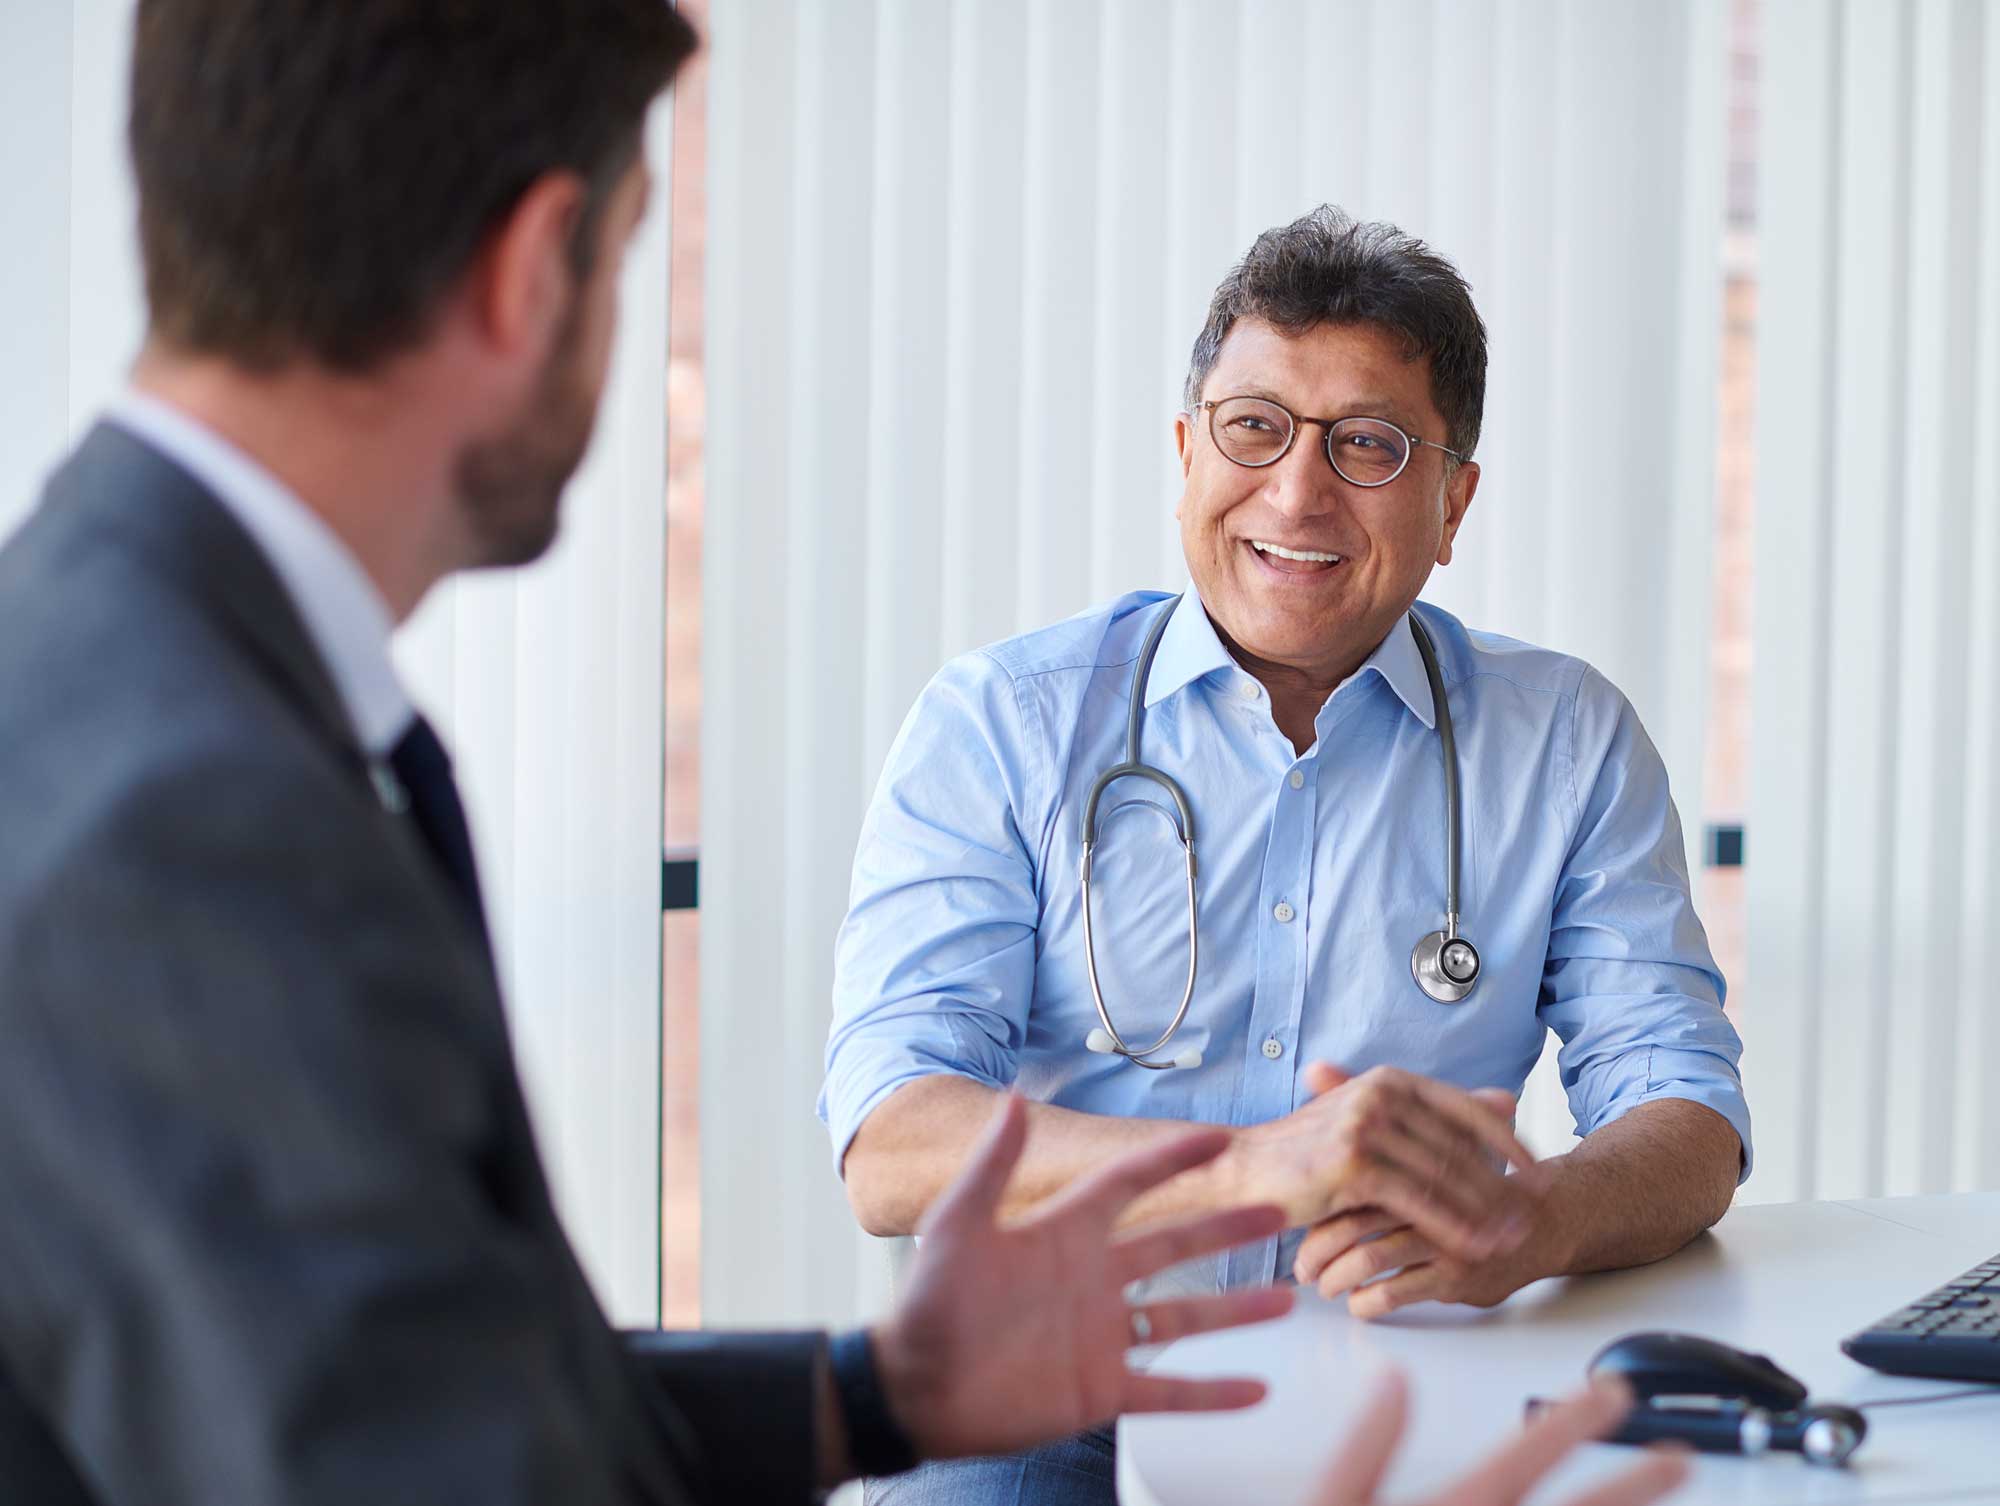 Smiling general practitioner is speaking with another man across his desk